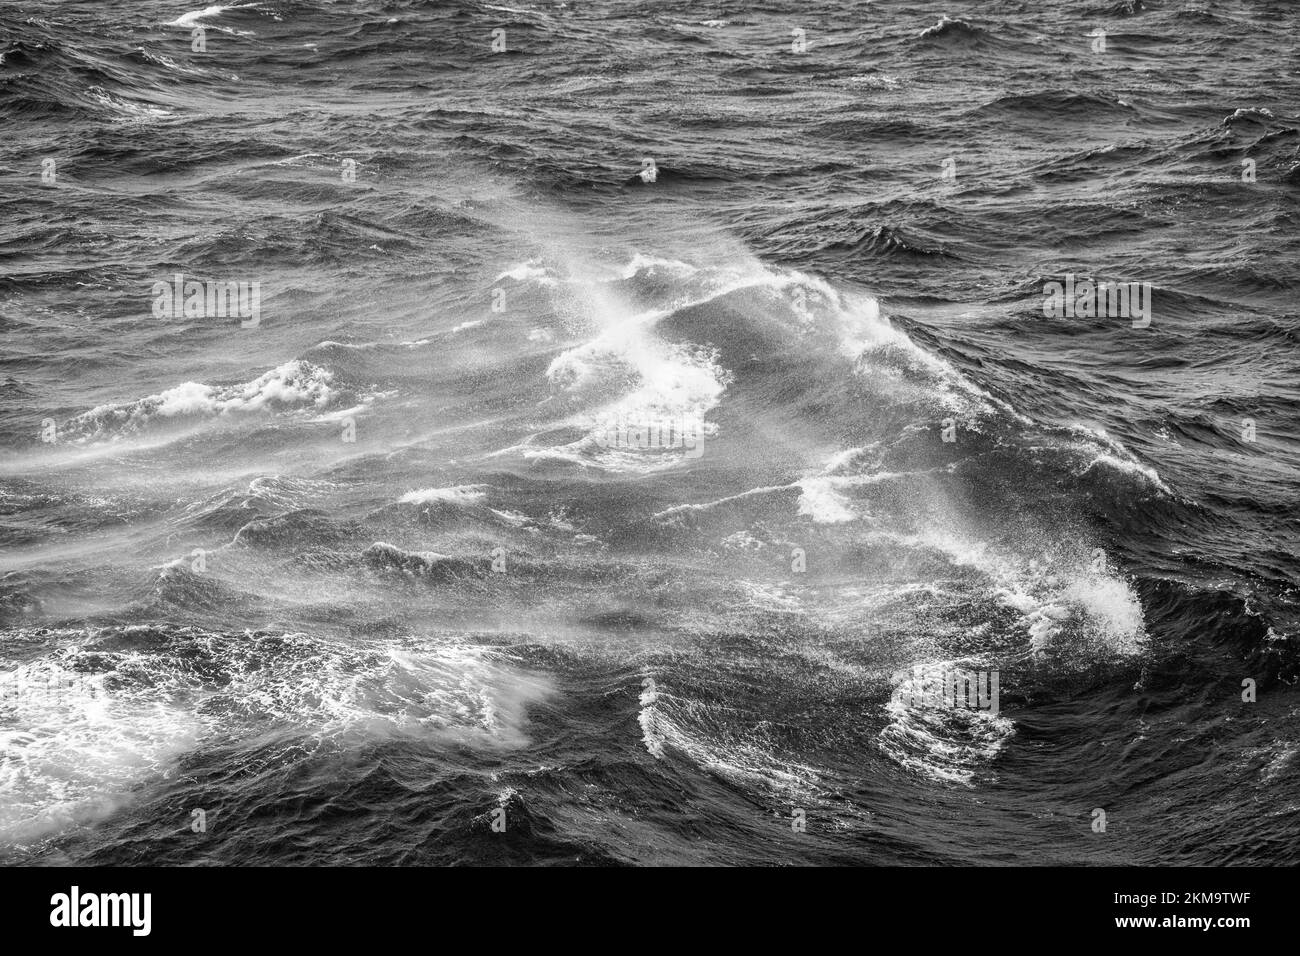 Boat wake waves in the Drake Passage, causing spray to come off the water. Stock Photo